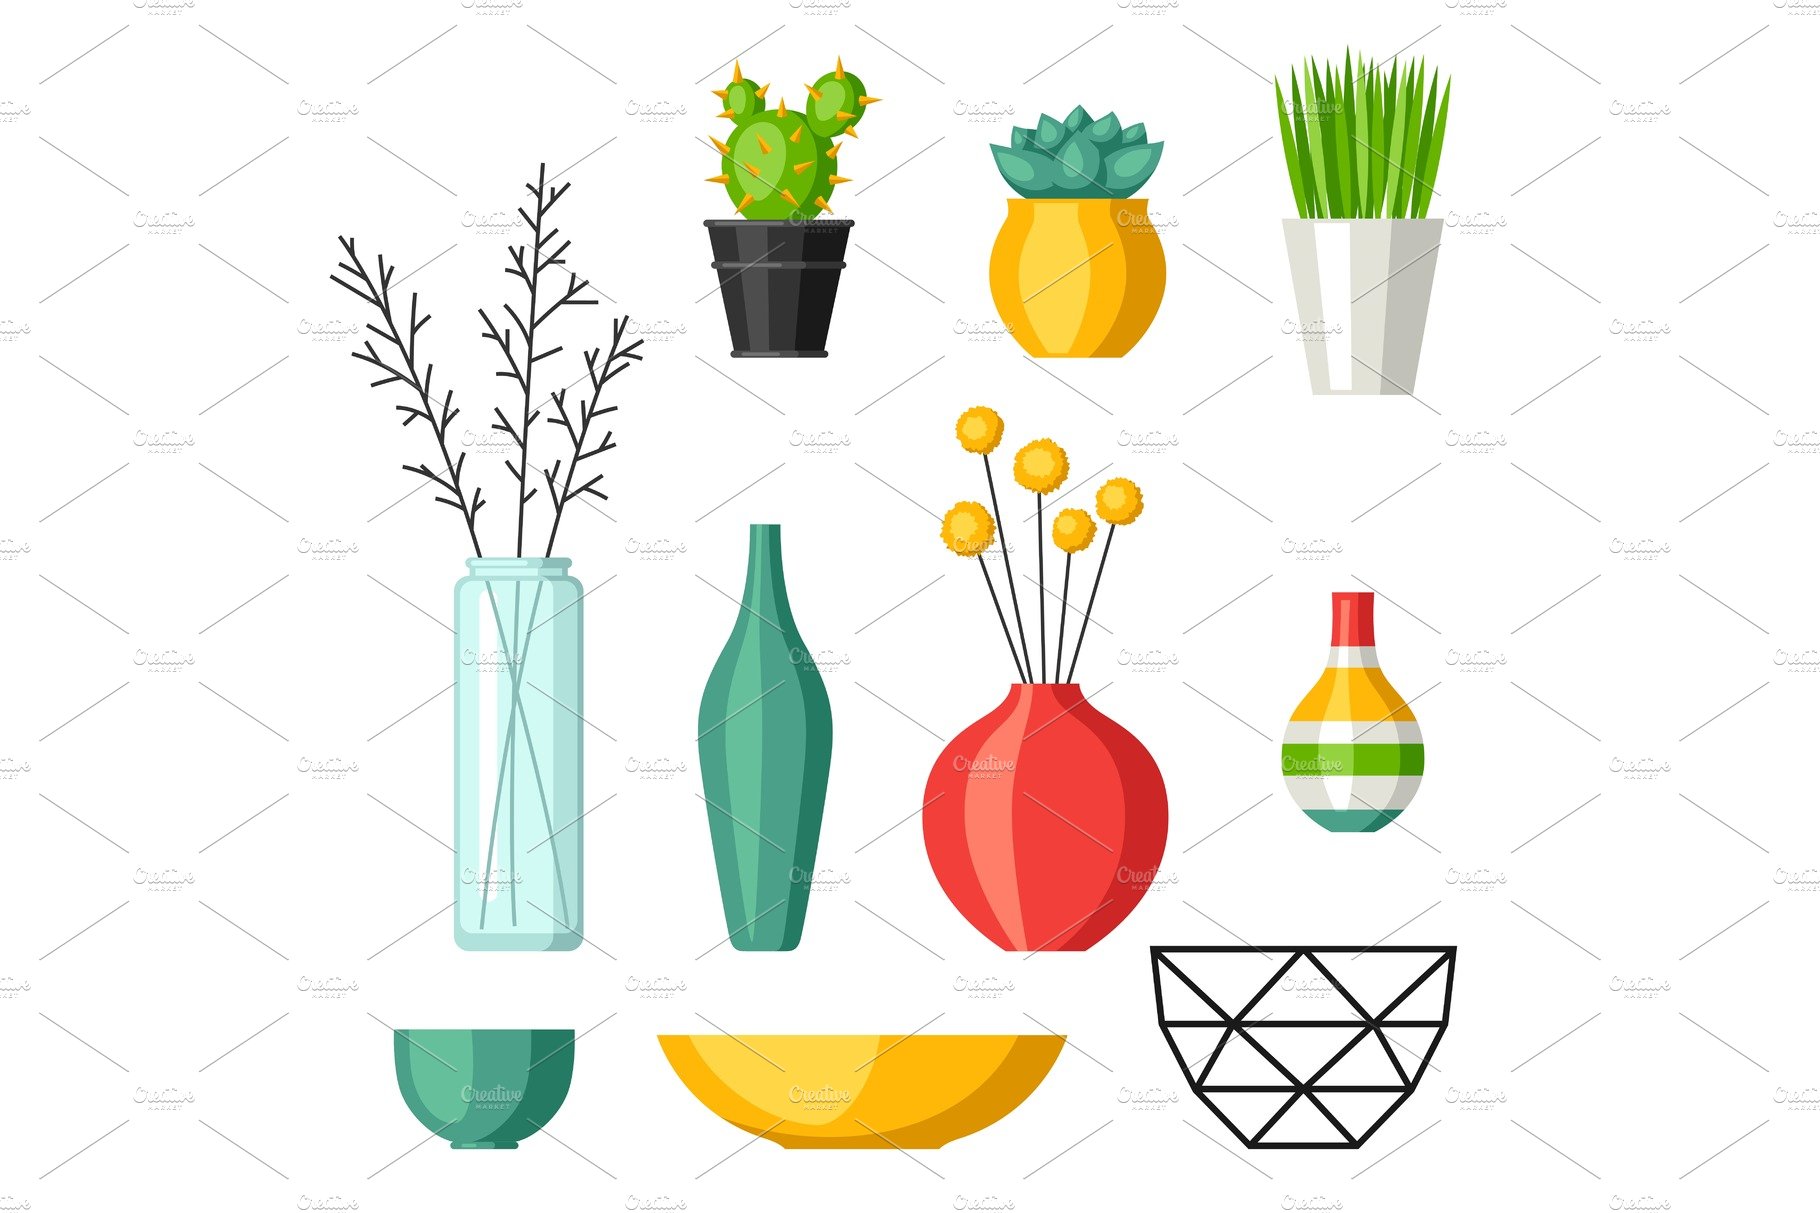 Home decoration vases flower pots, succulents and cacti cover image.